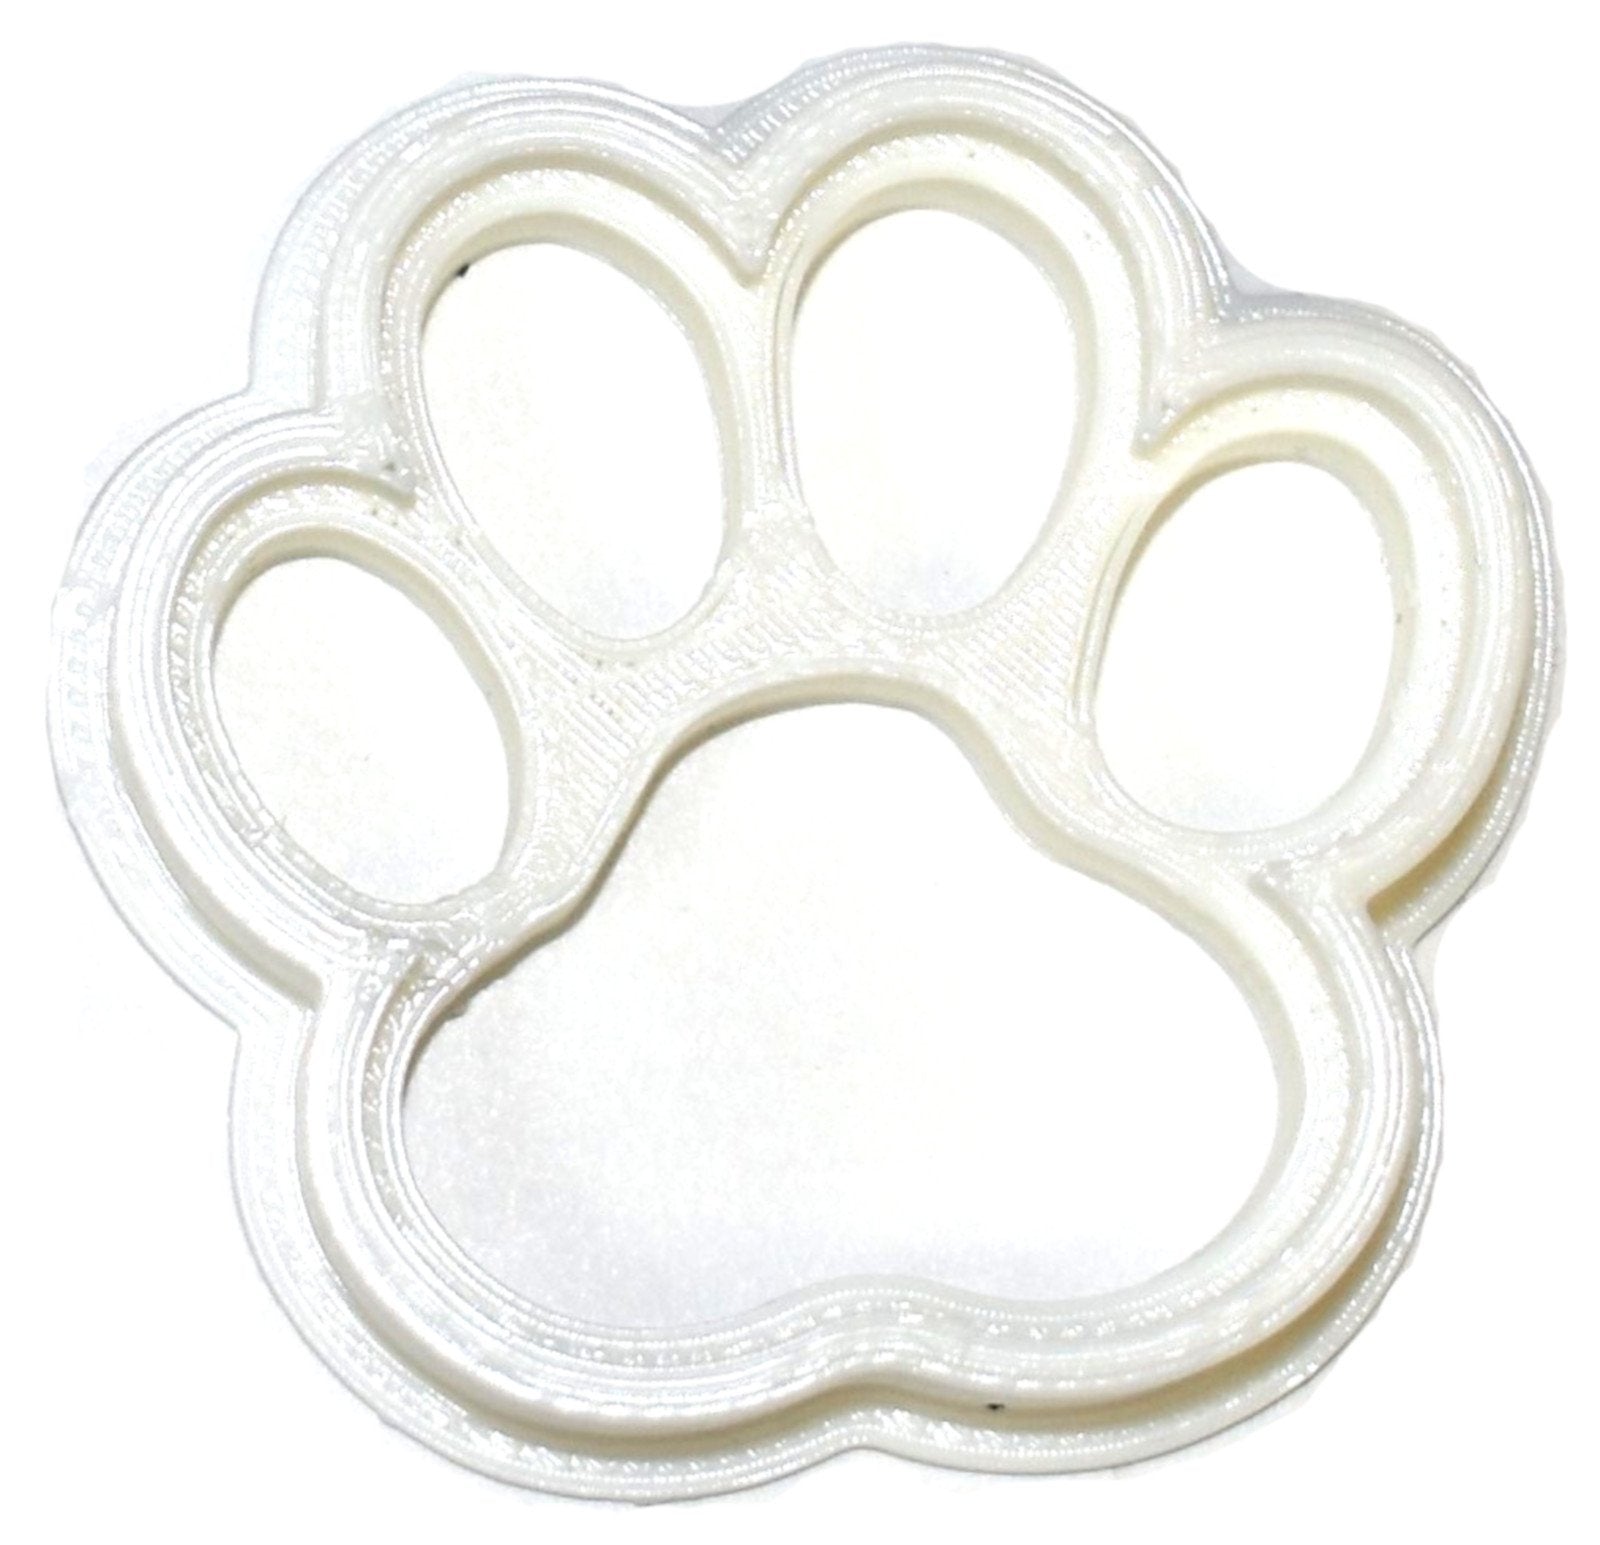 Paw Print Cookie Cutter Embosser - Large